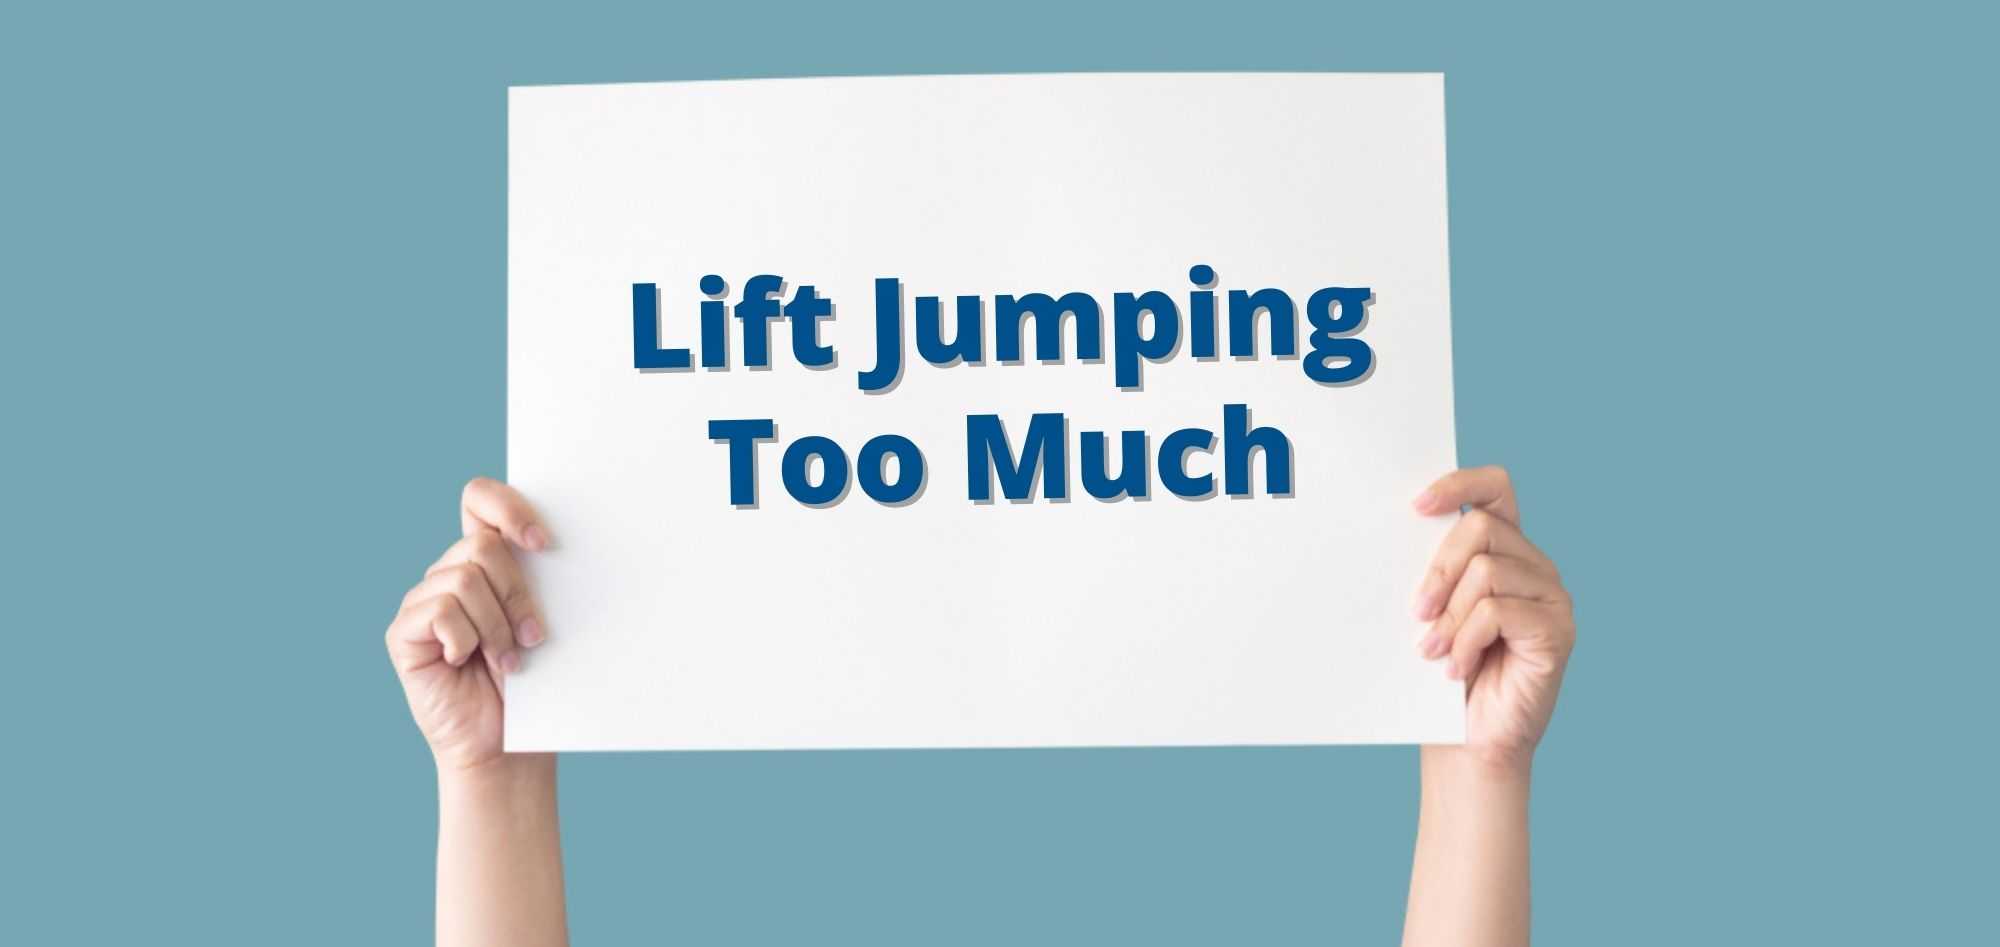 Lift Jumping Too Much